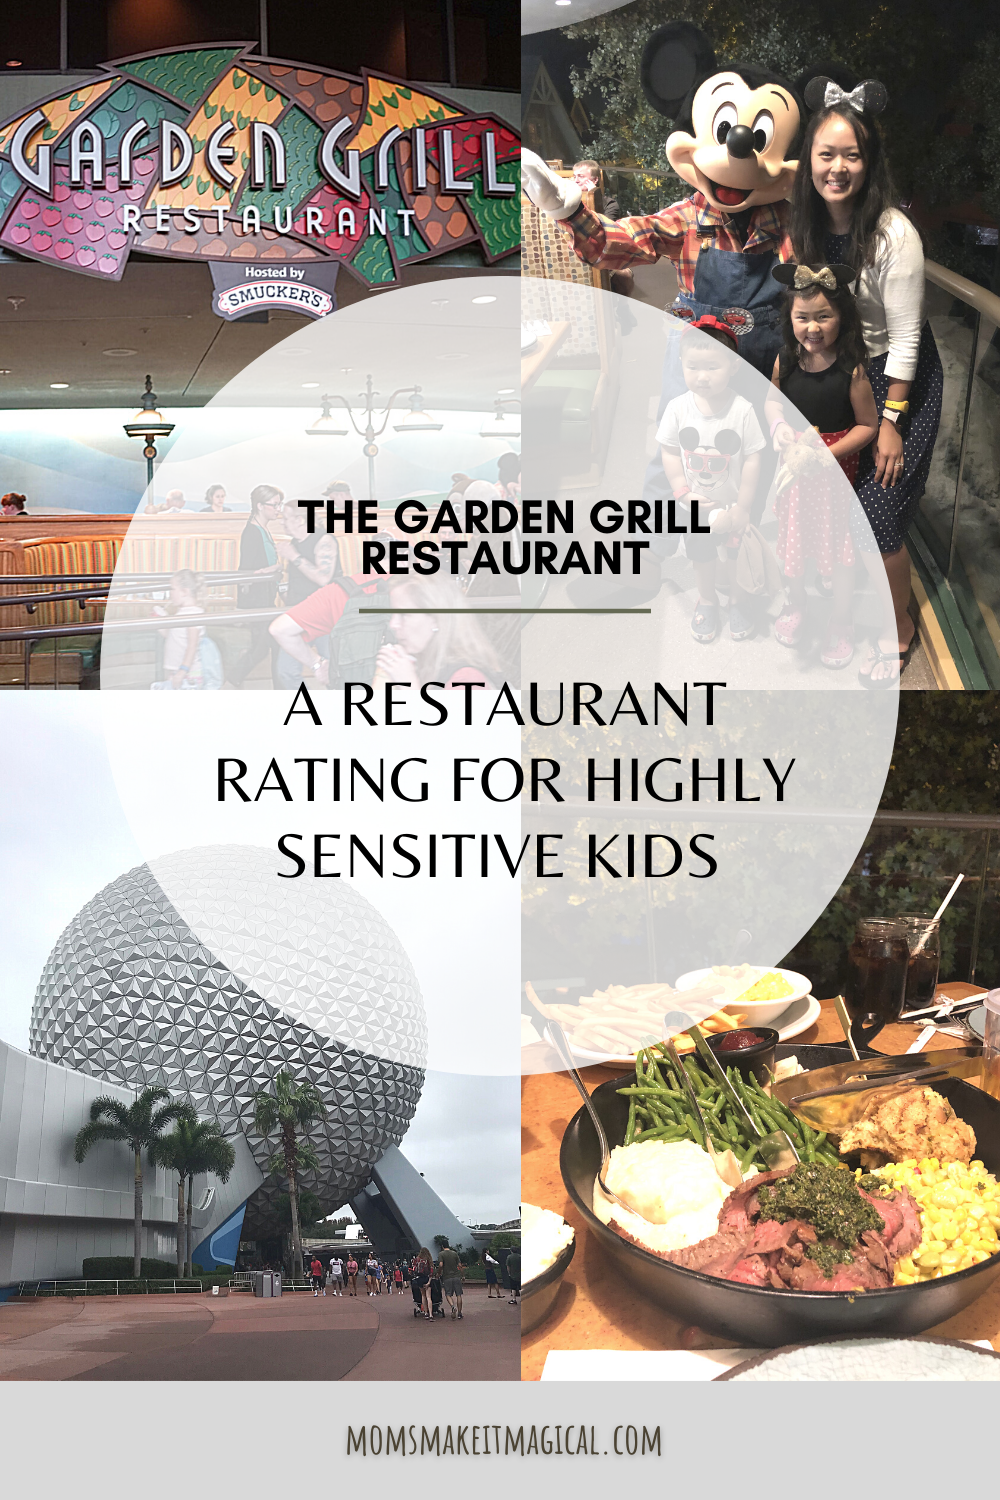 Should you take your family to the Garden Grill restaurant?